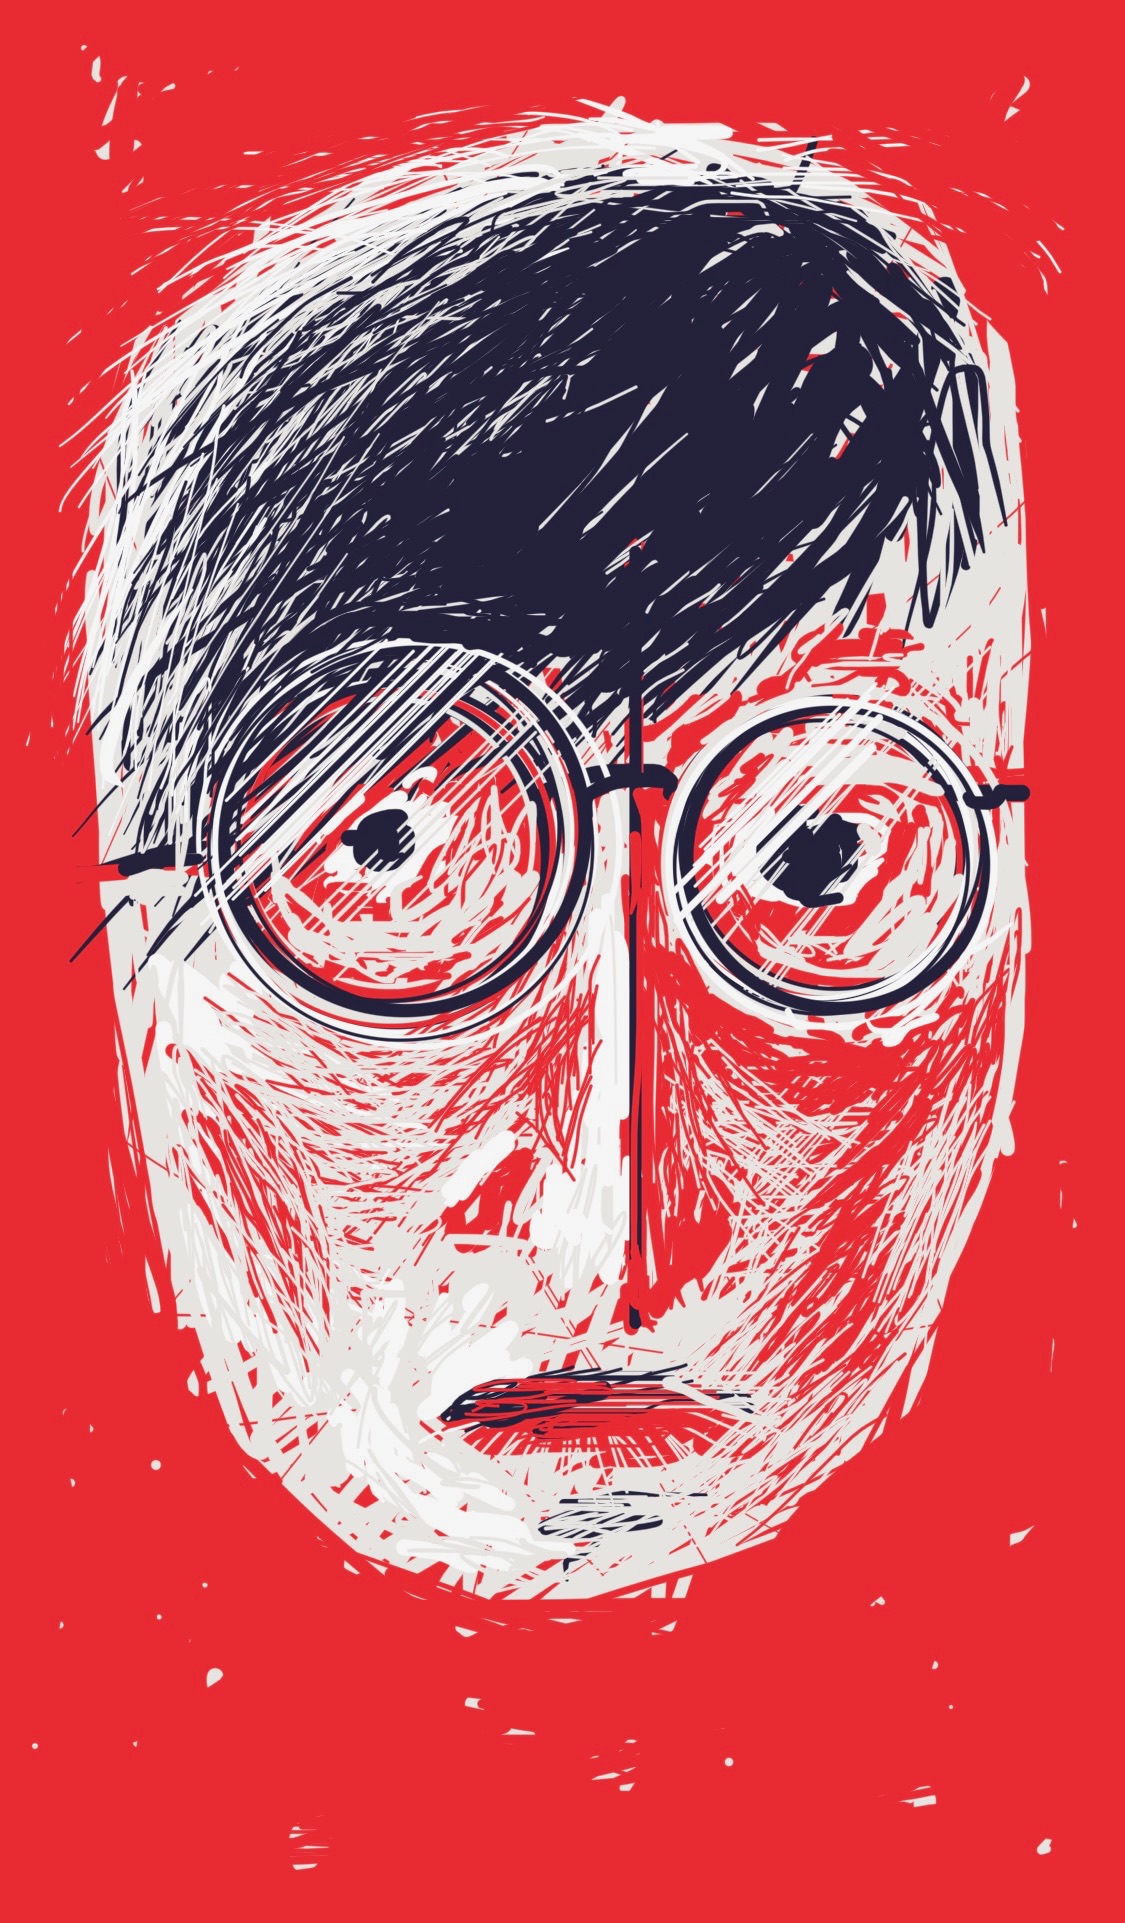 A face with glasses